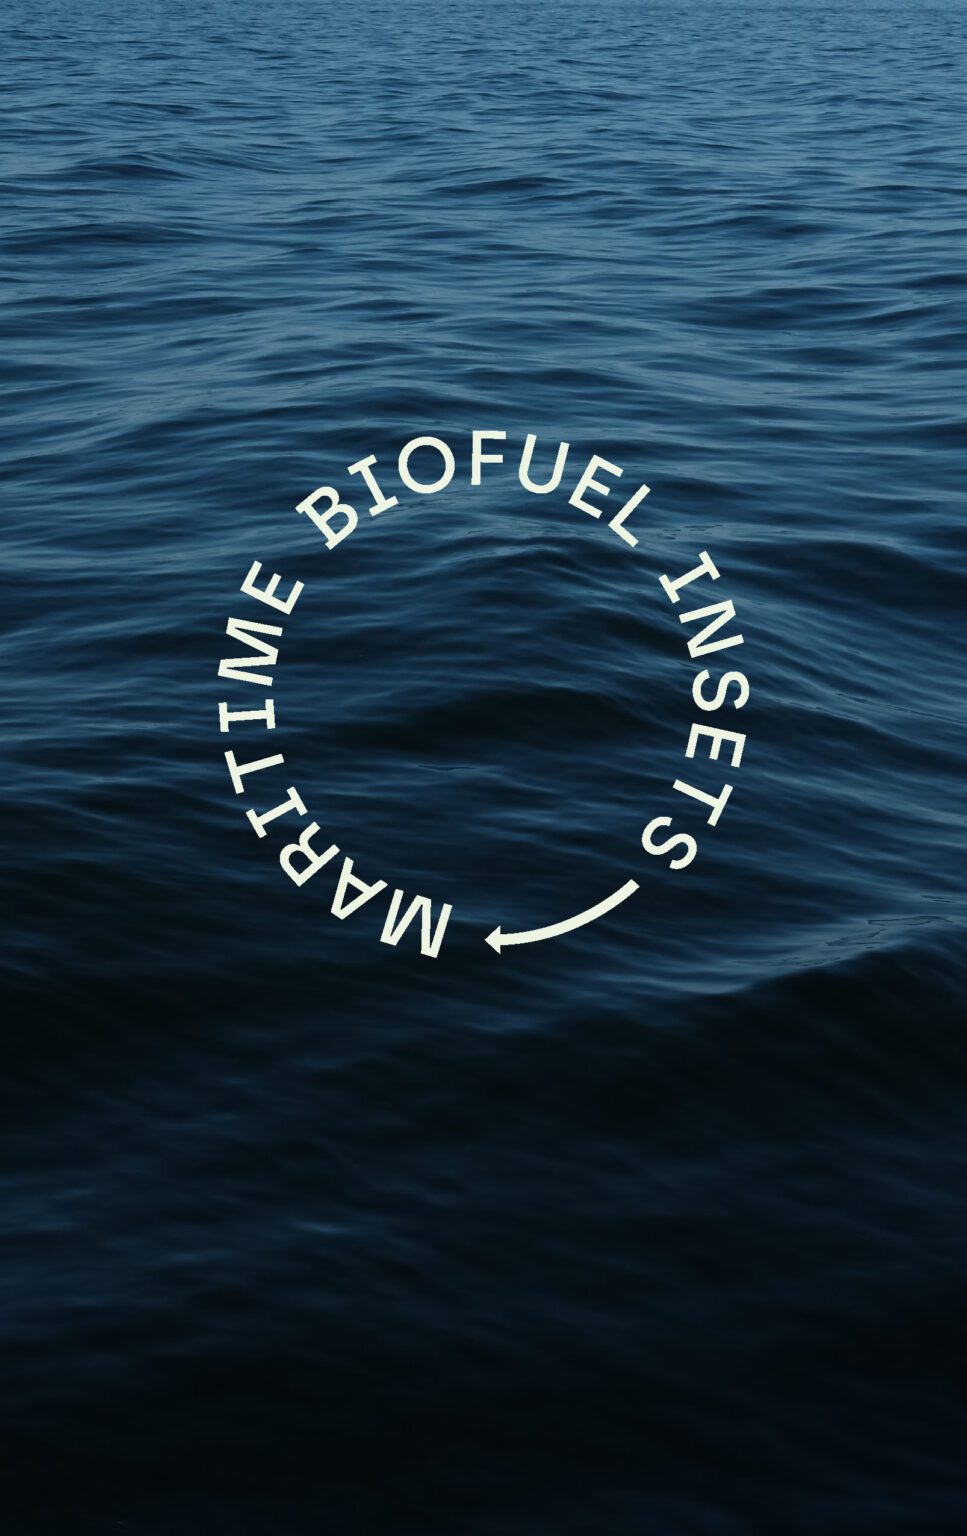 The image shows a view of the ocean with gentle waves. Overlaying the water is a circular text that reads "MARITIME BIOFUEL INSETS," with an arrow forming part of the circle.